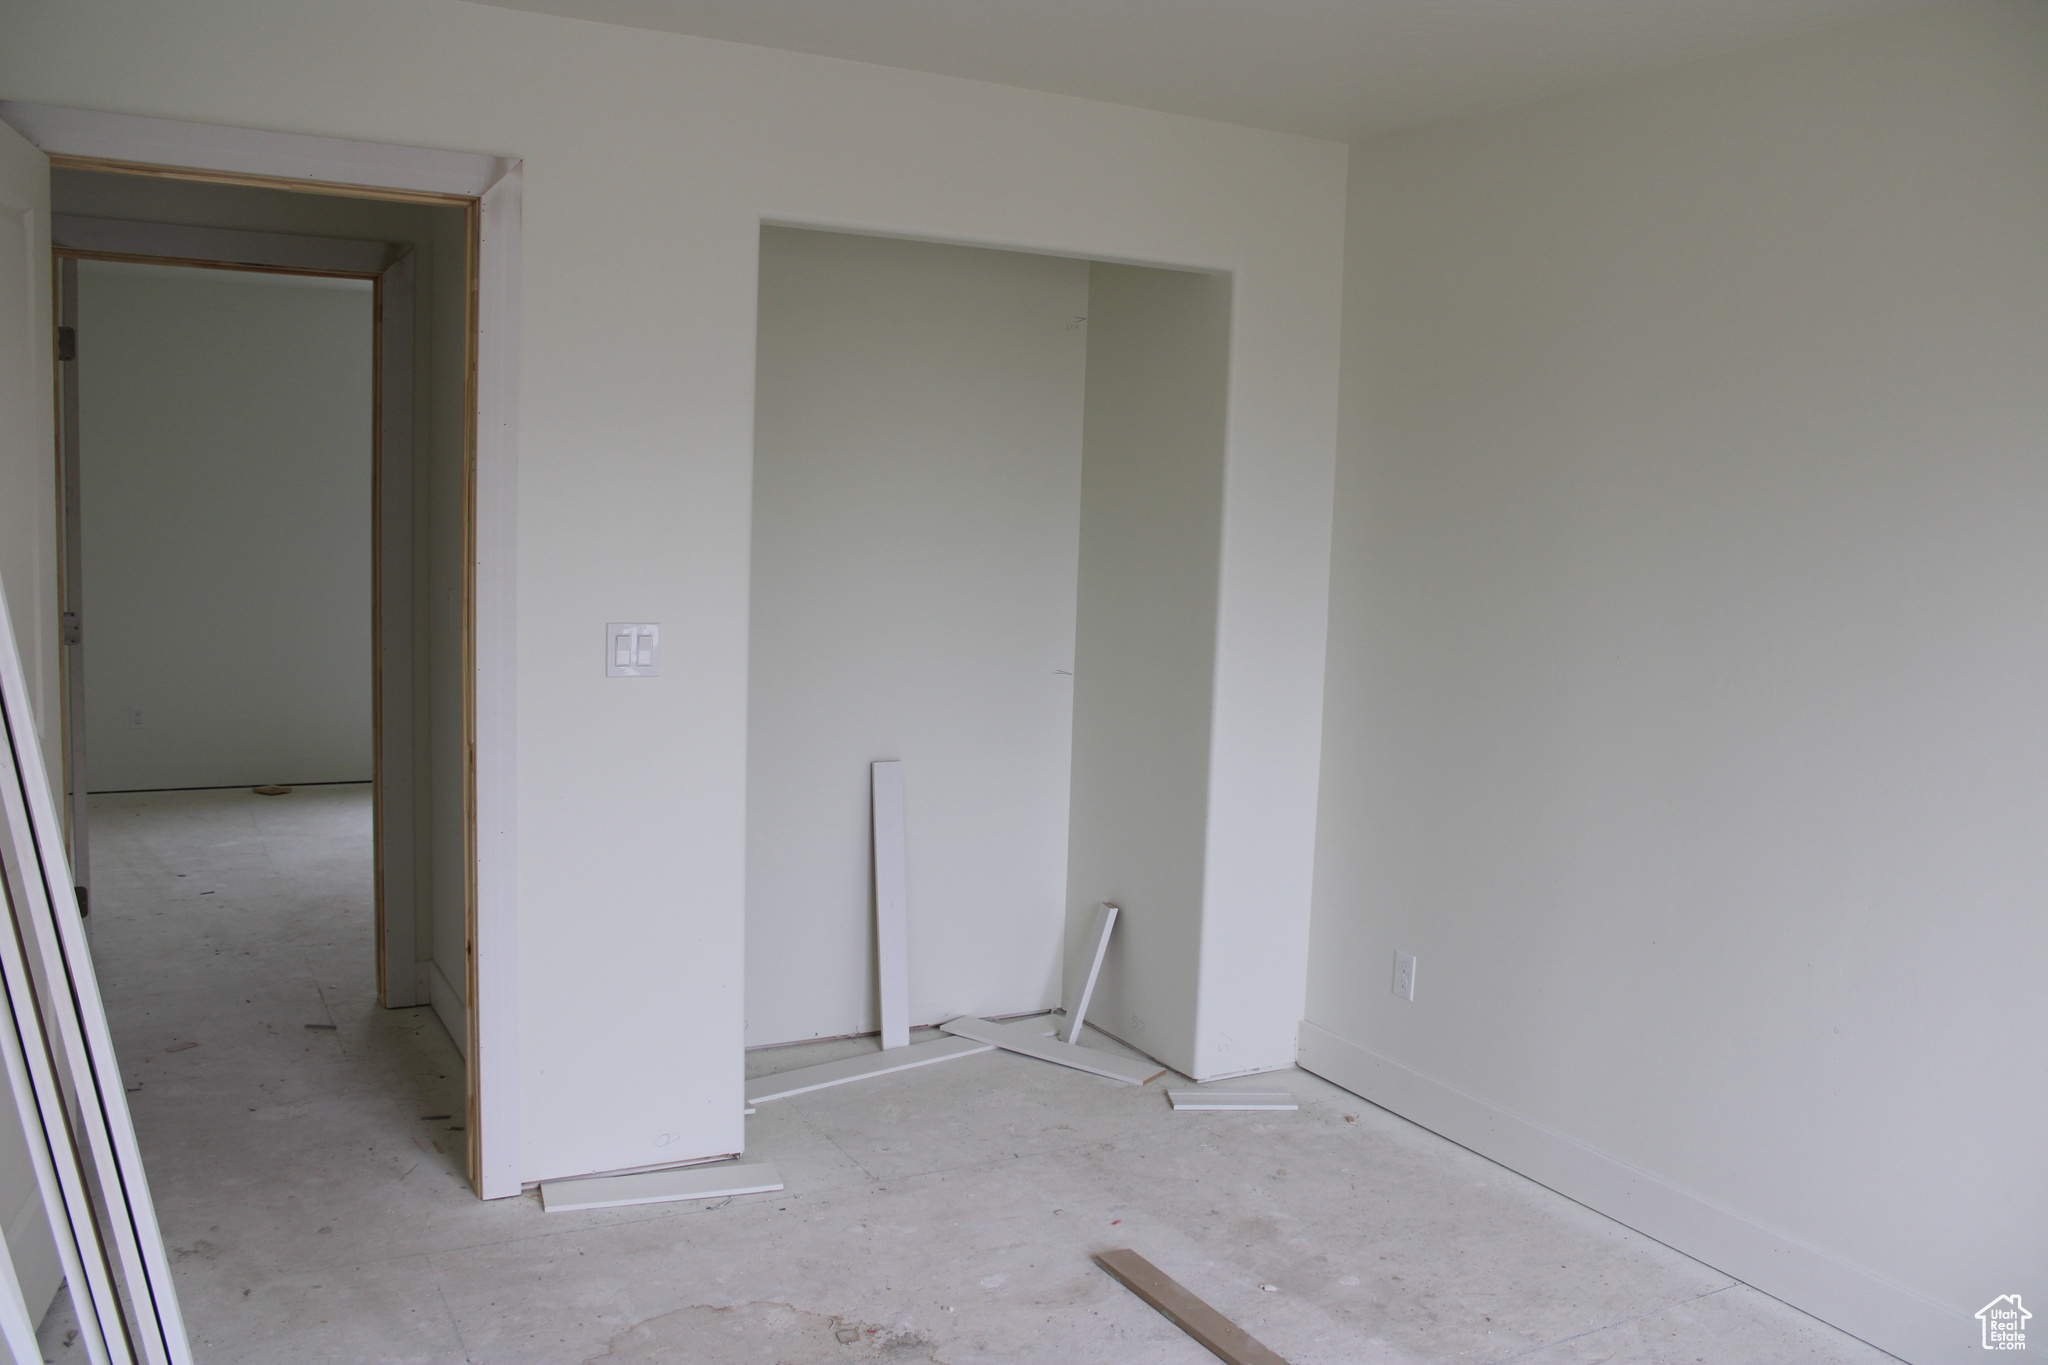 Closet will have Shelf & Hanging Rod in Bedroom 5